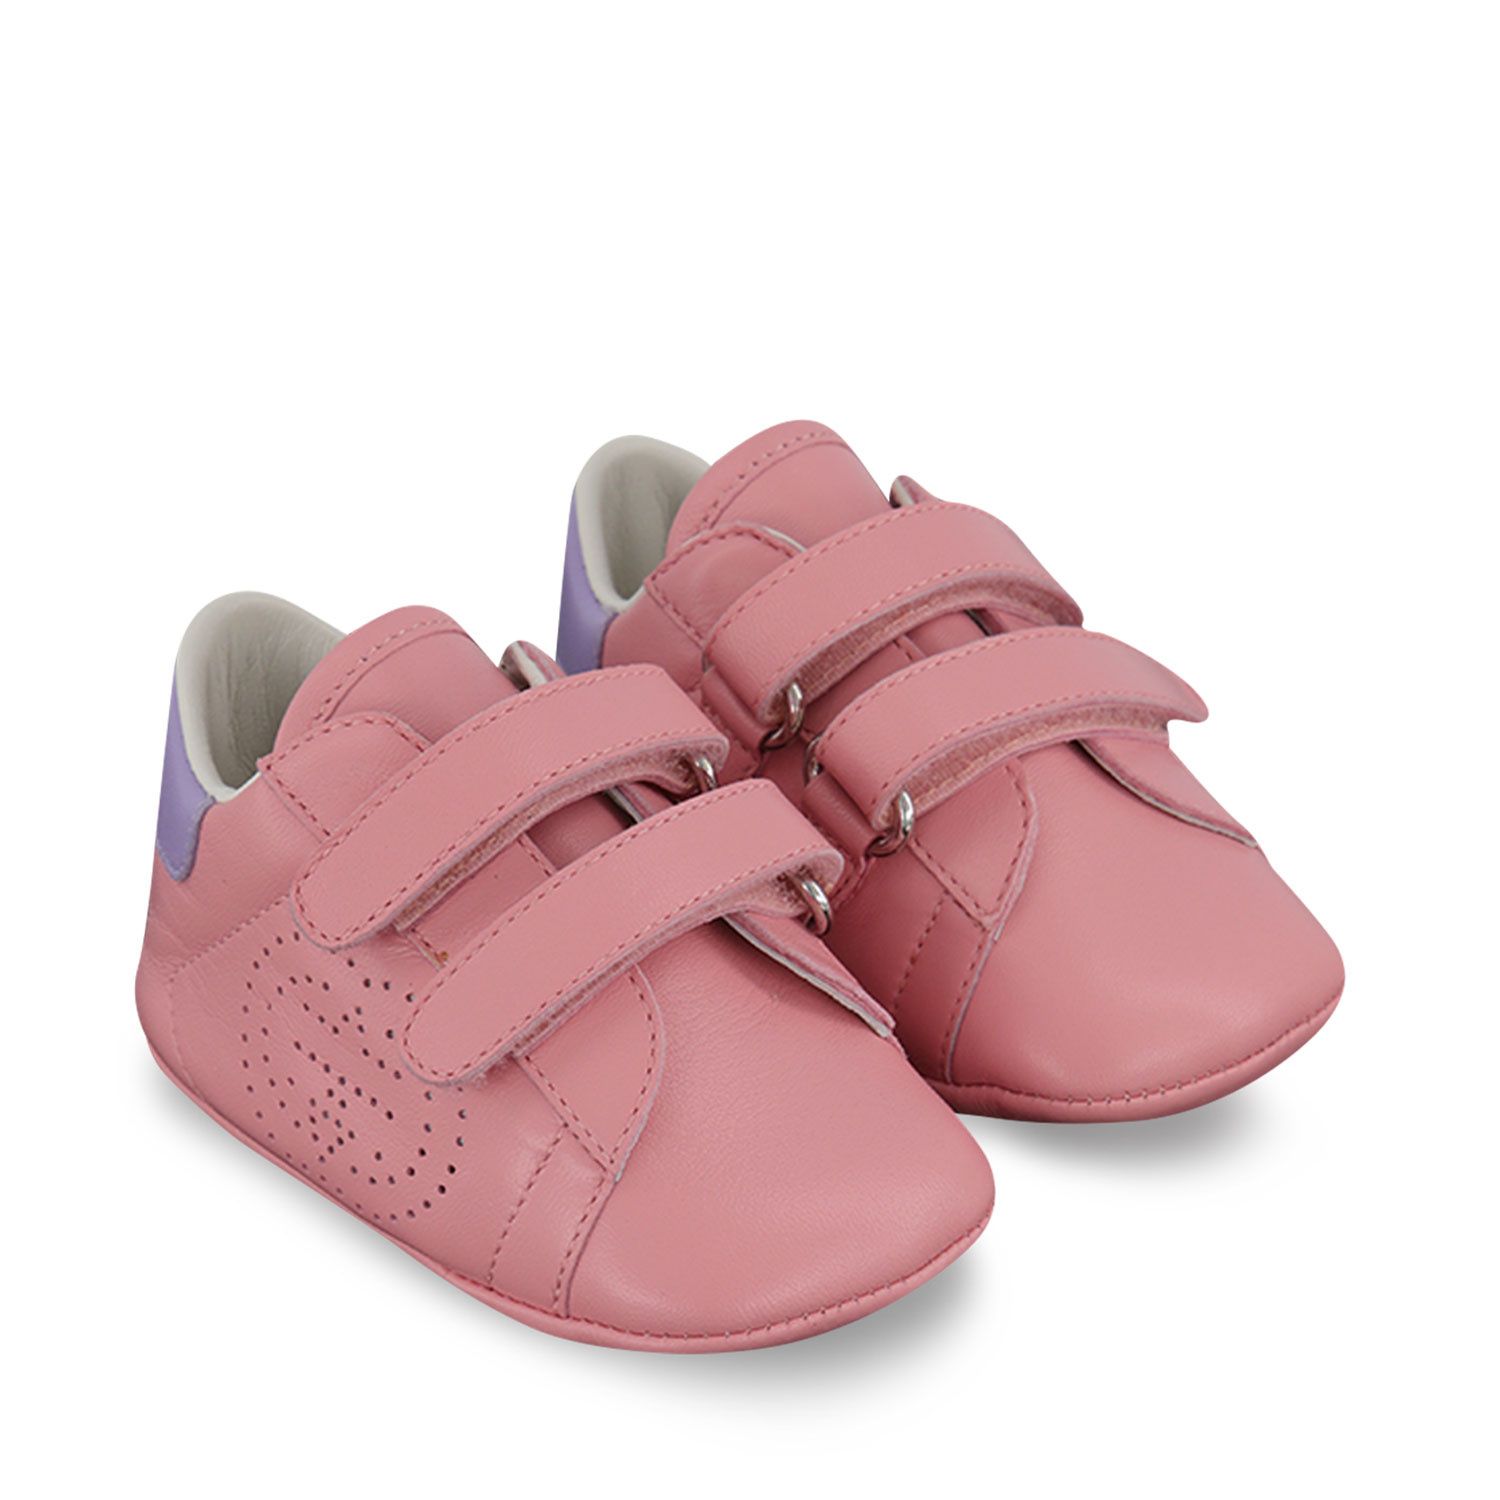 pink gucci baby shoes